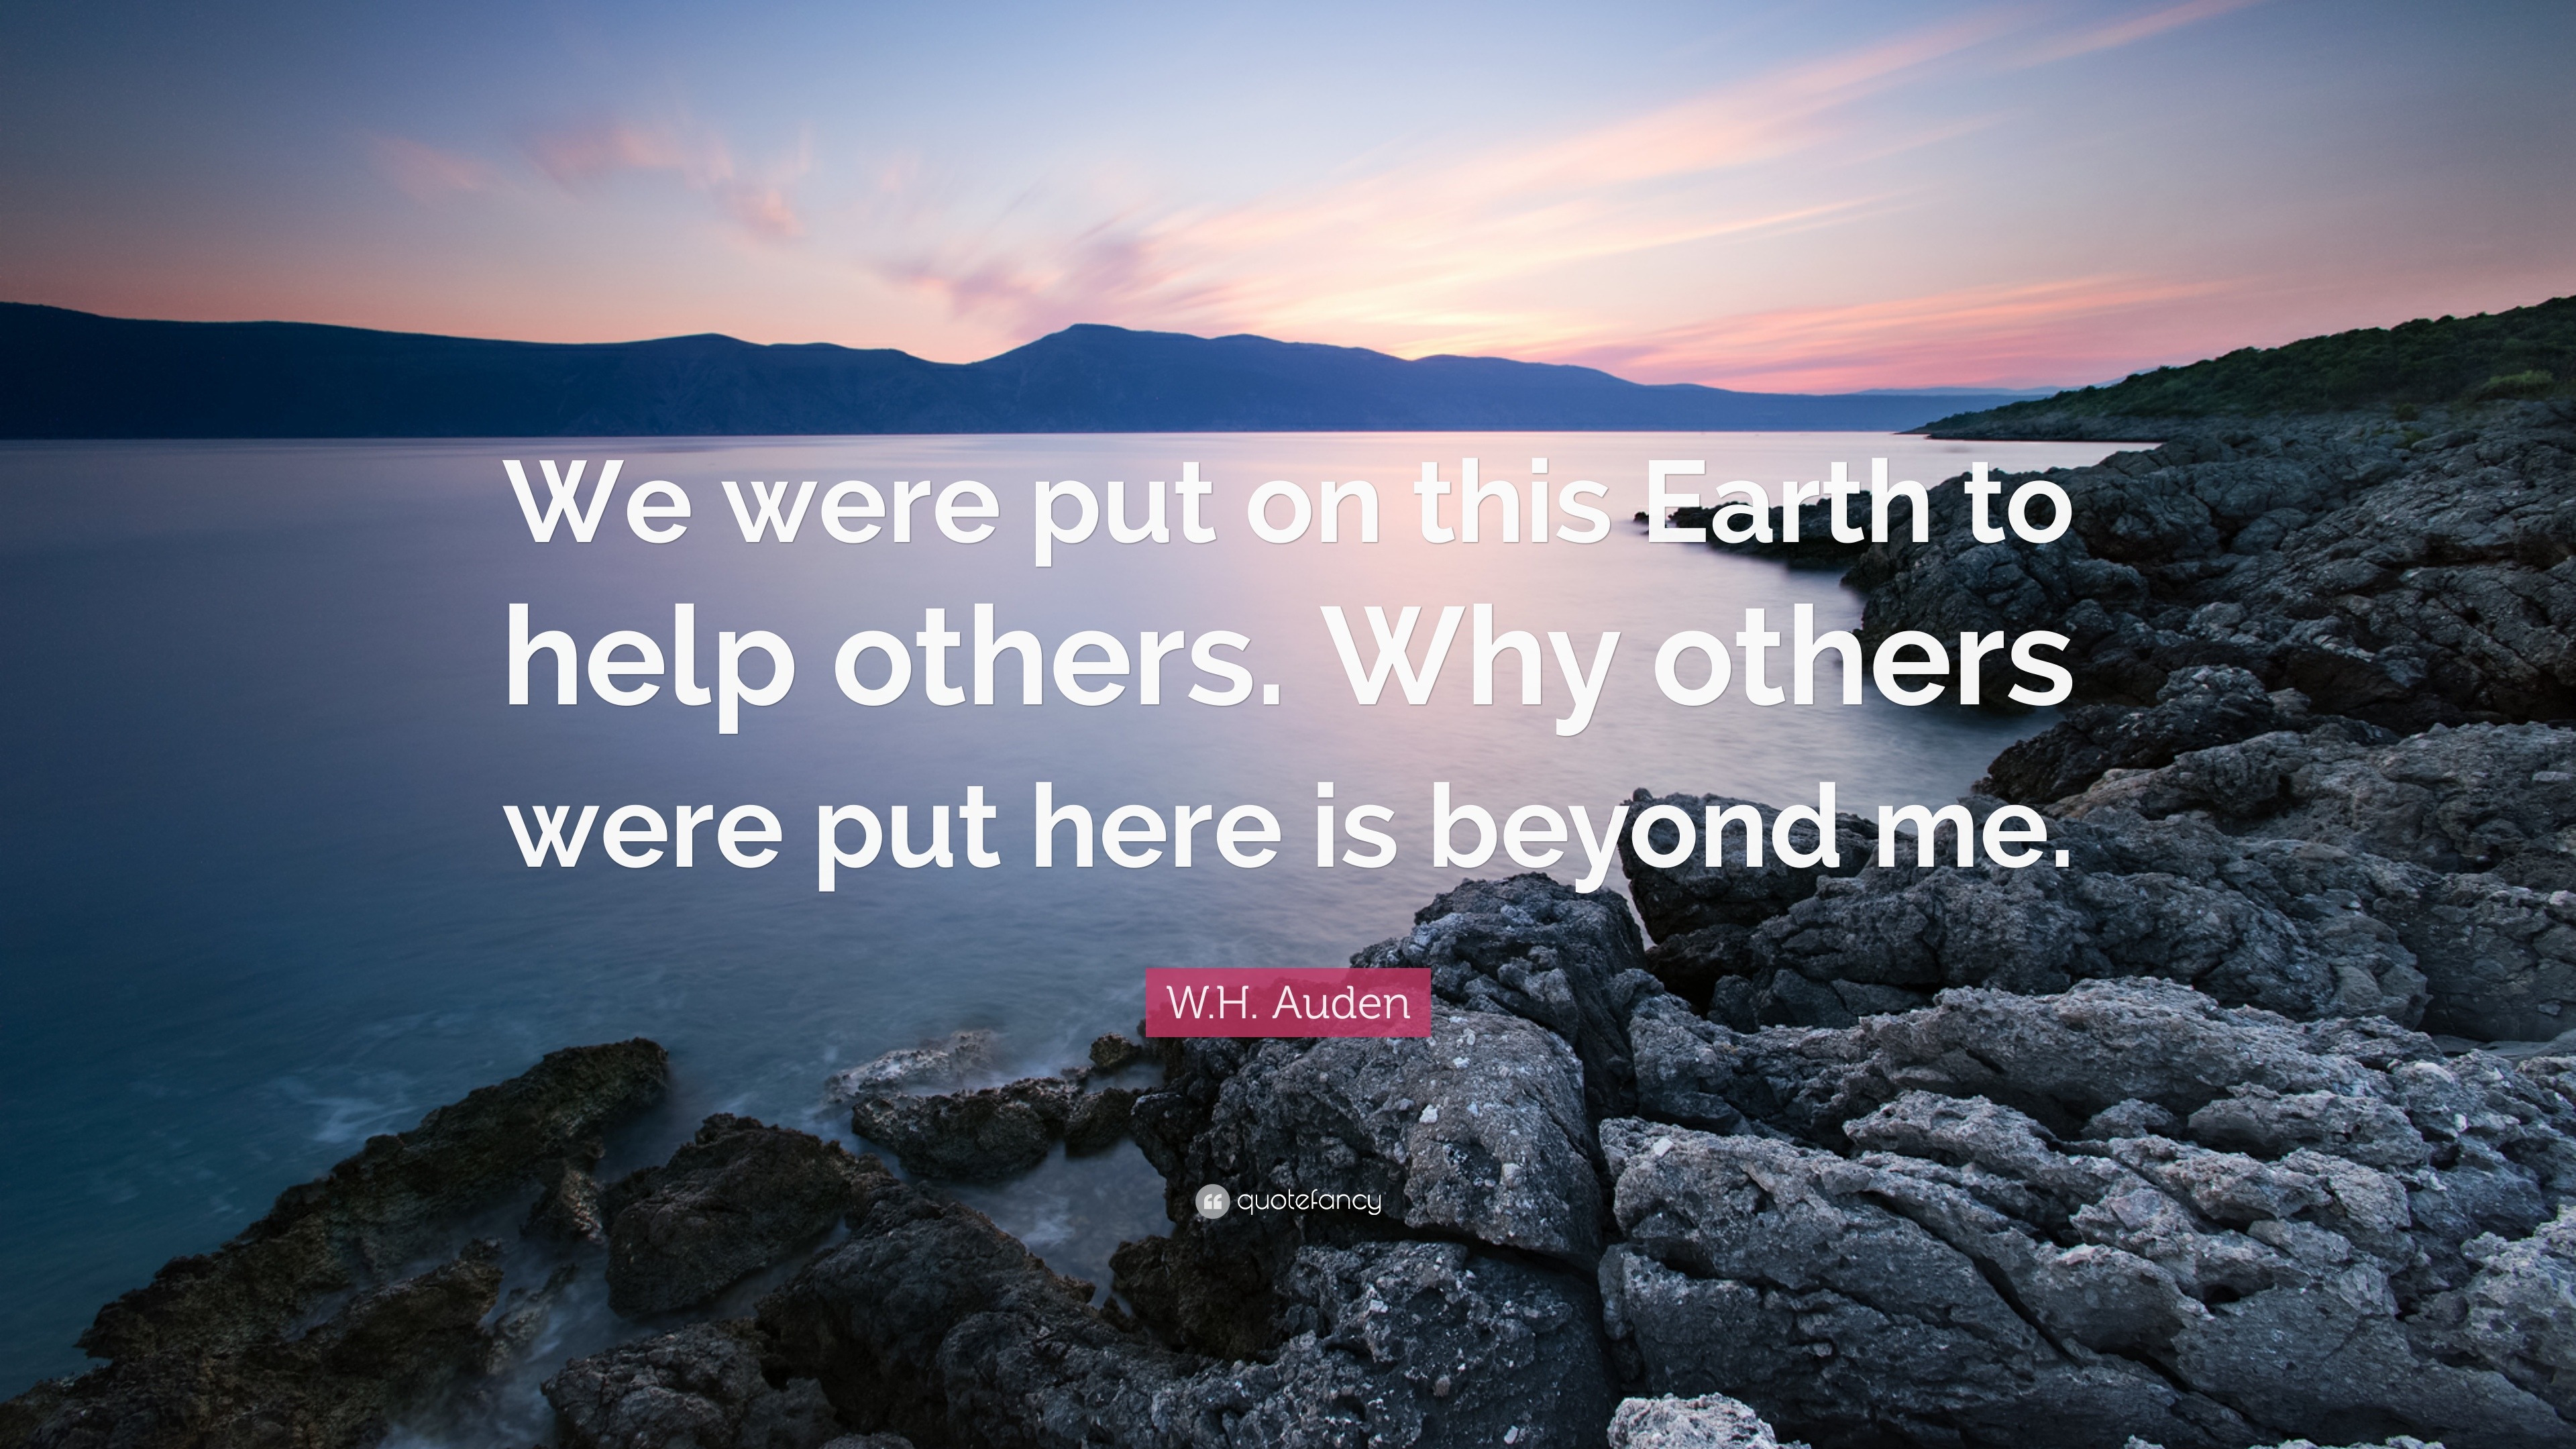 W.H. Auden Quote: “We were put on this Earth to help others. Why others ...